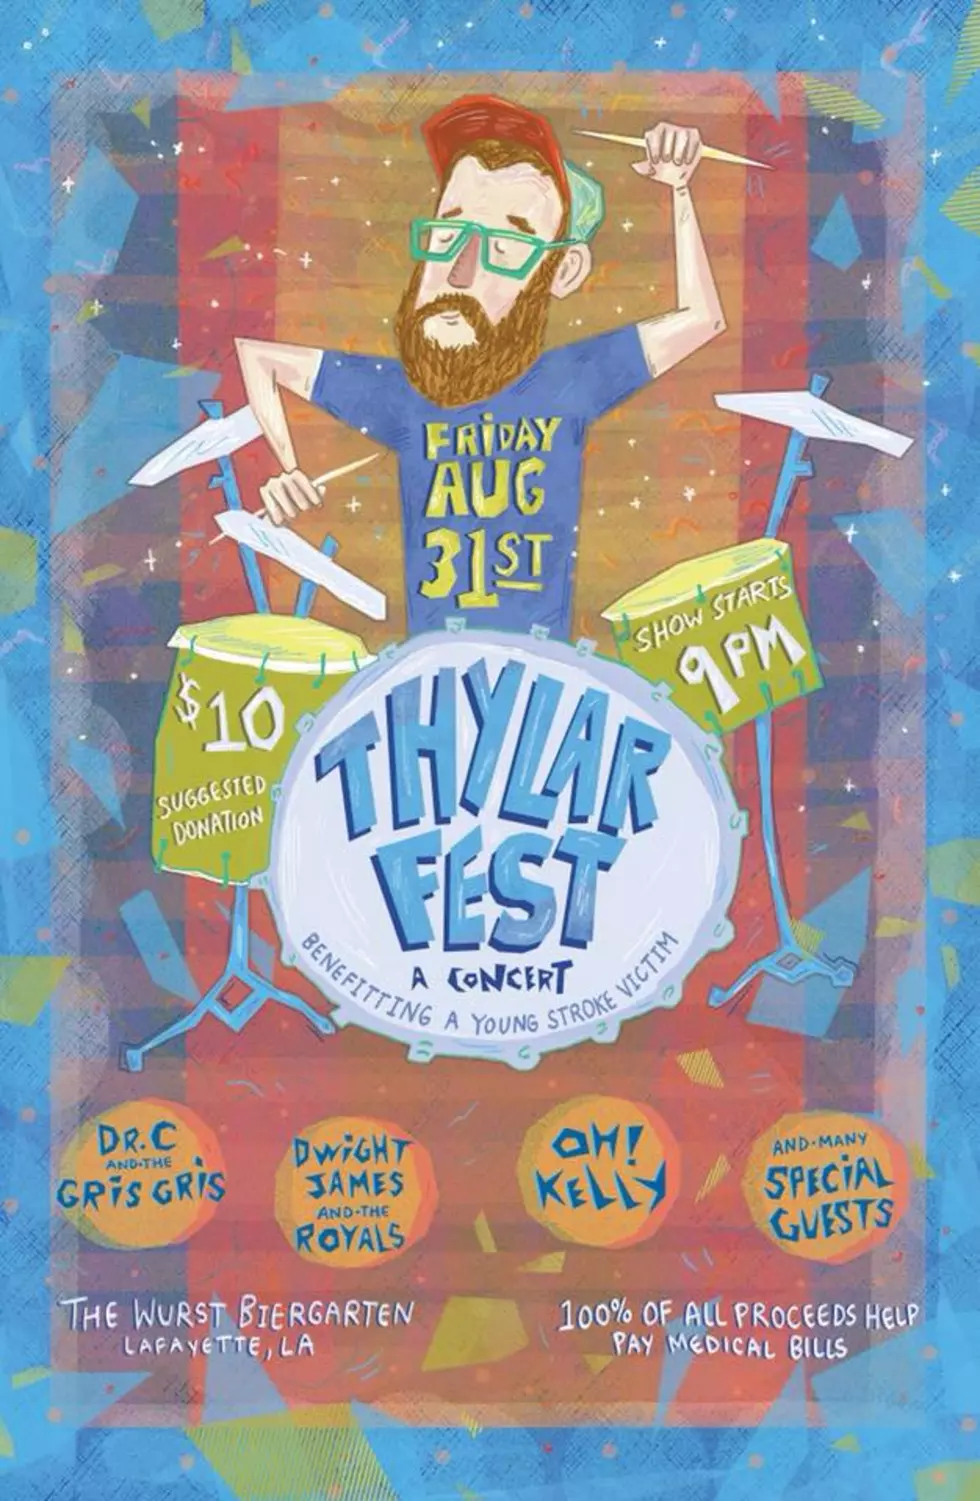 Thylar-Fest: A Benefit Concert For A Young Stroke Victim